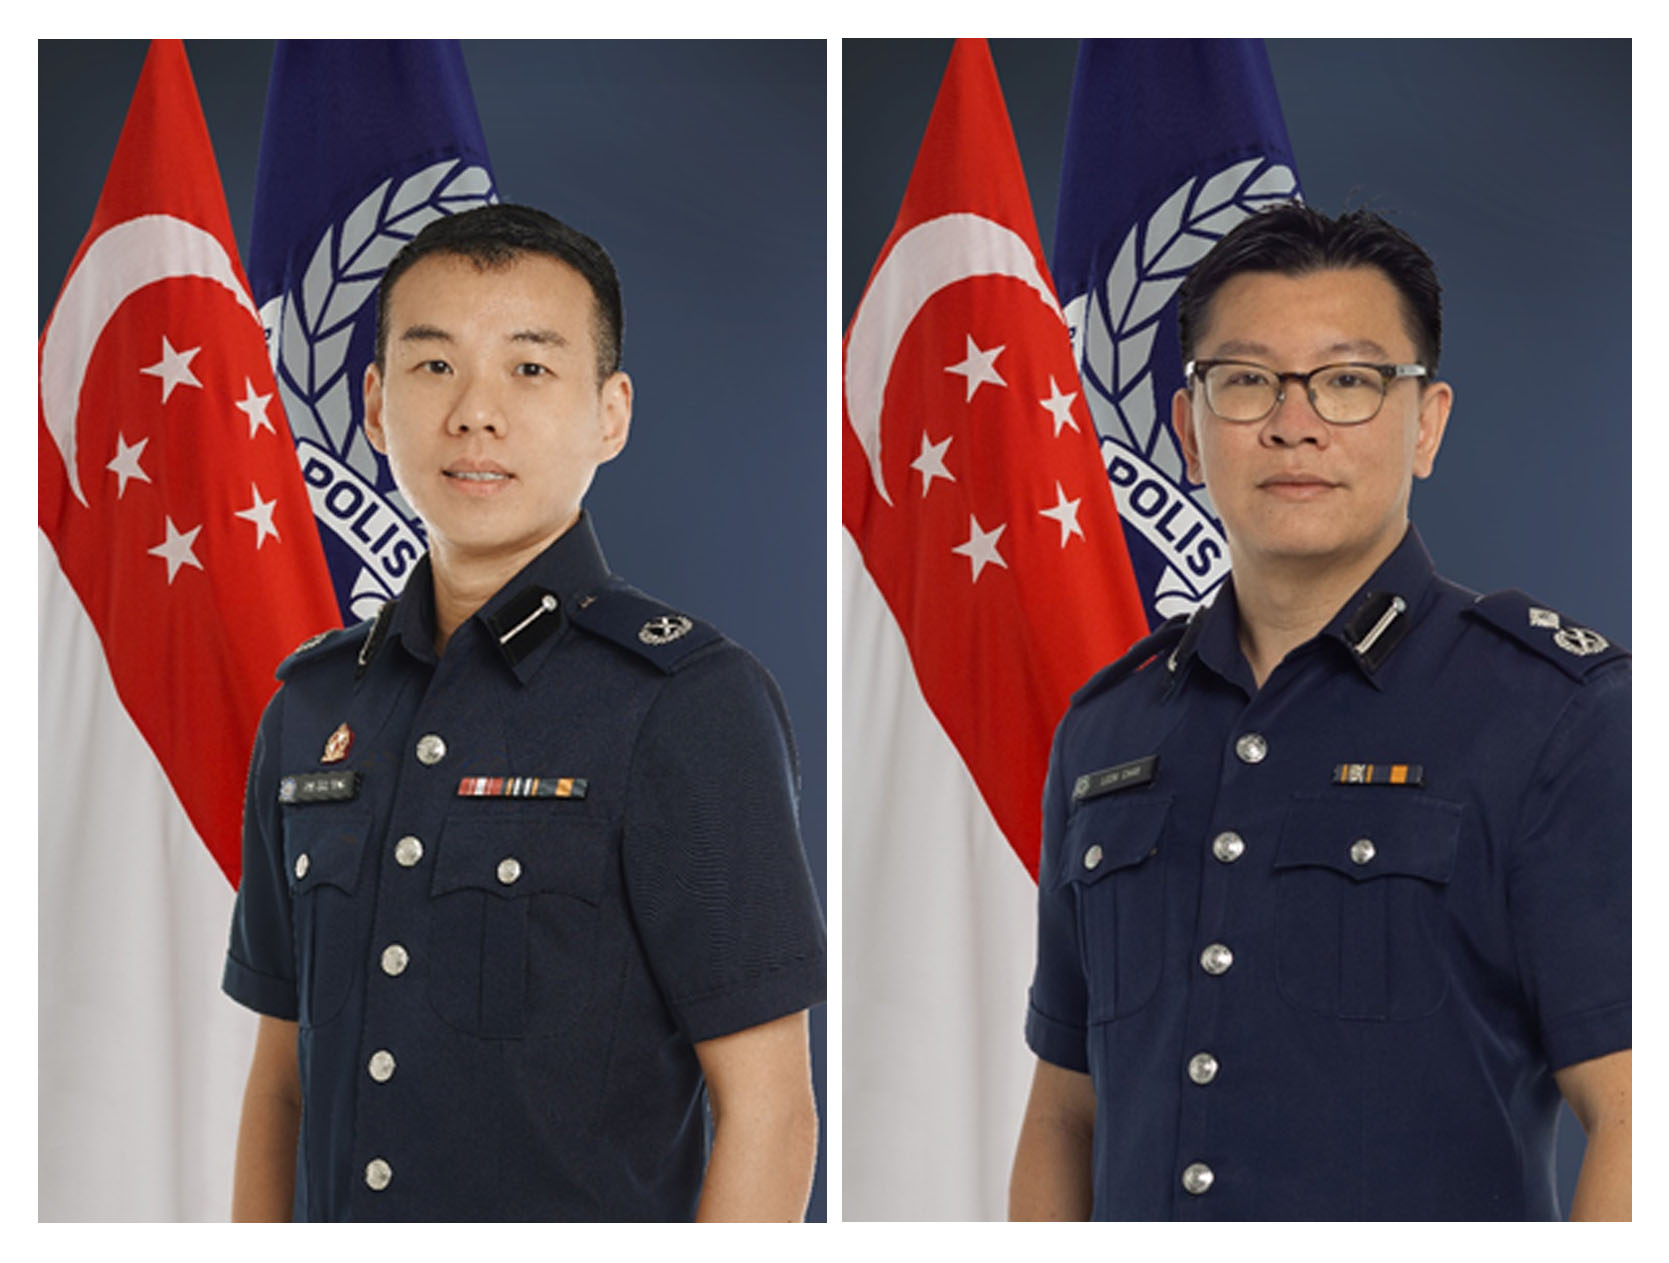 20210517_change_of_command_at_woodlands_police_division